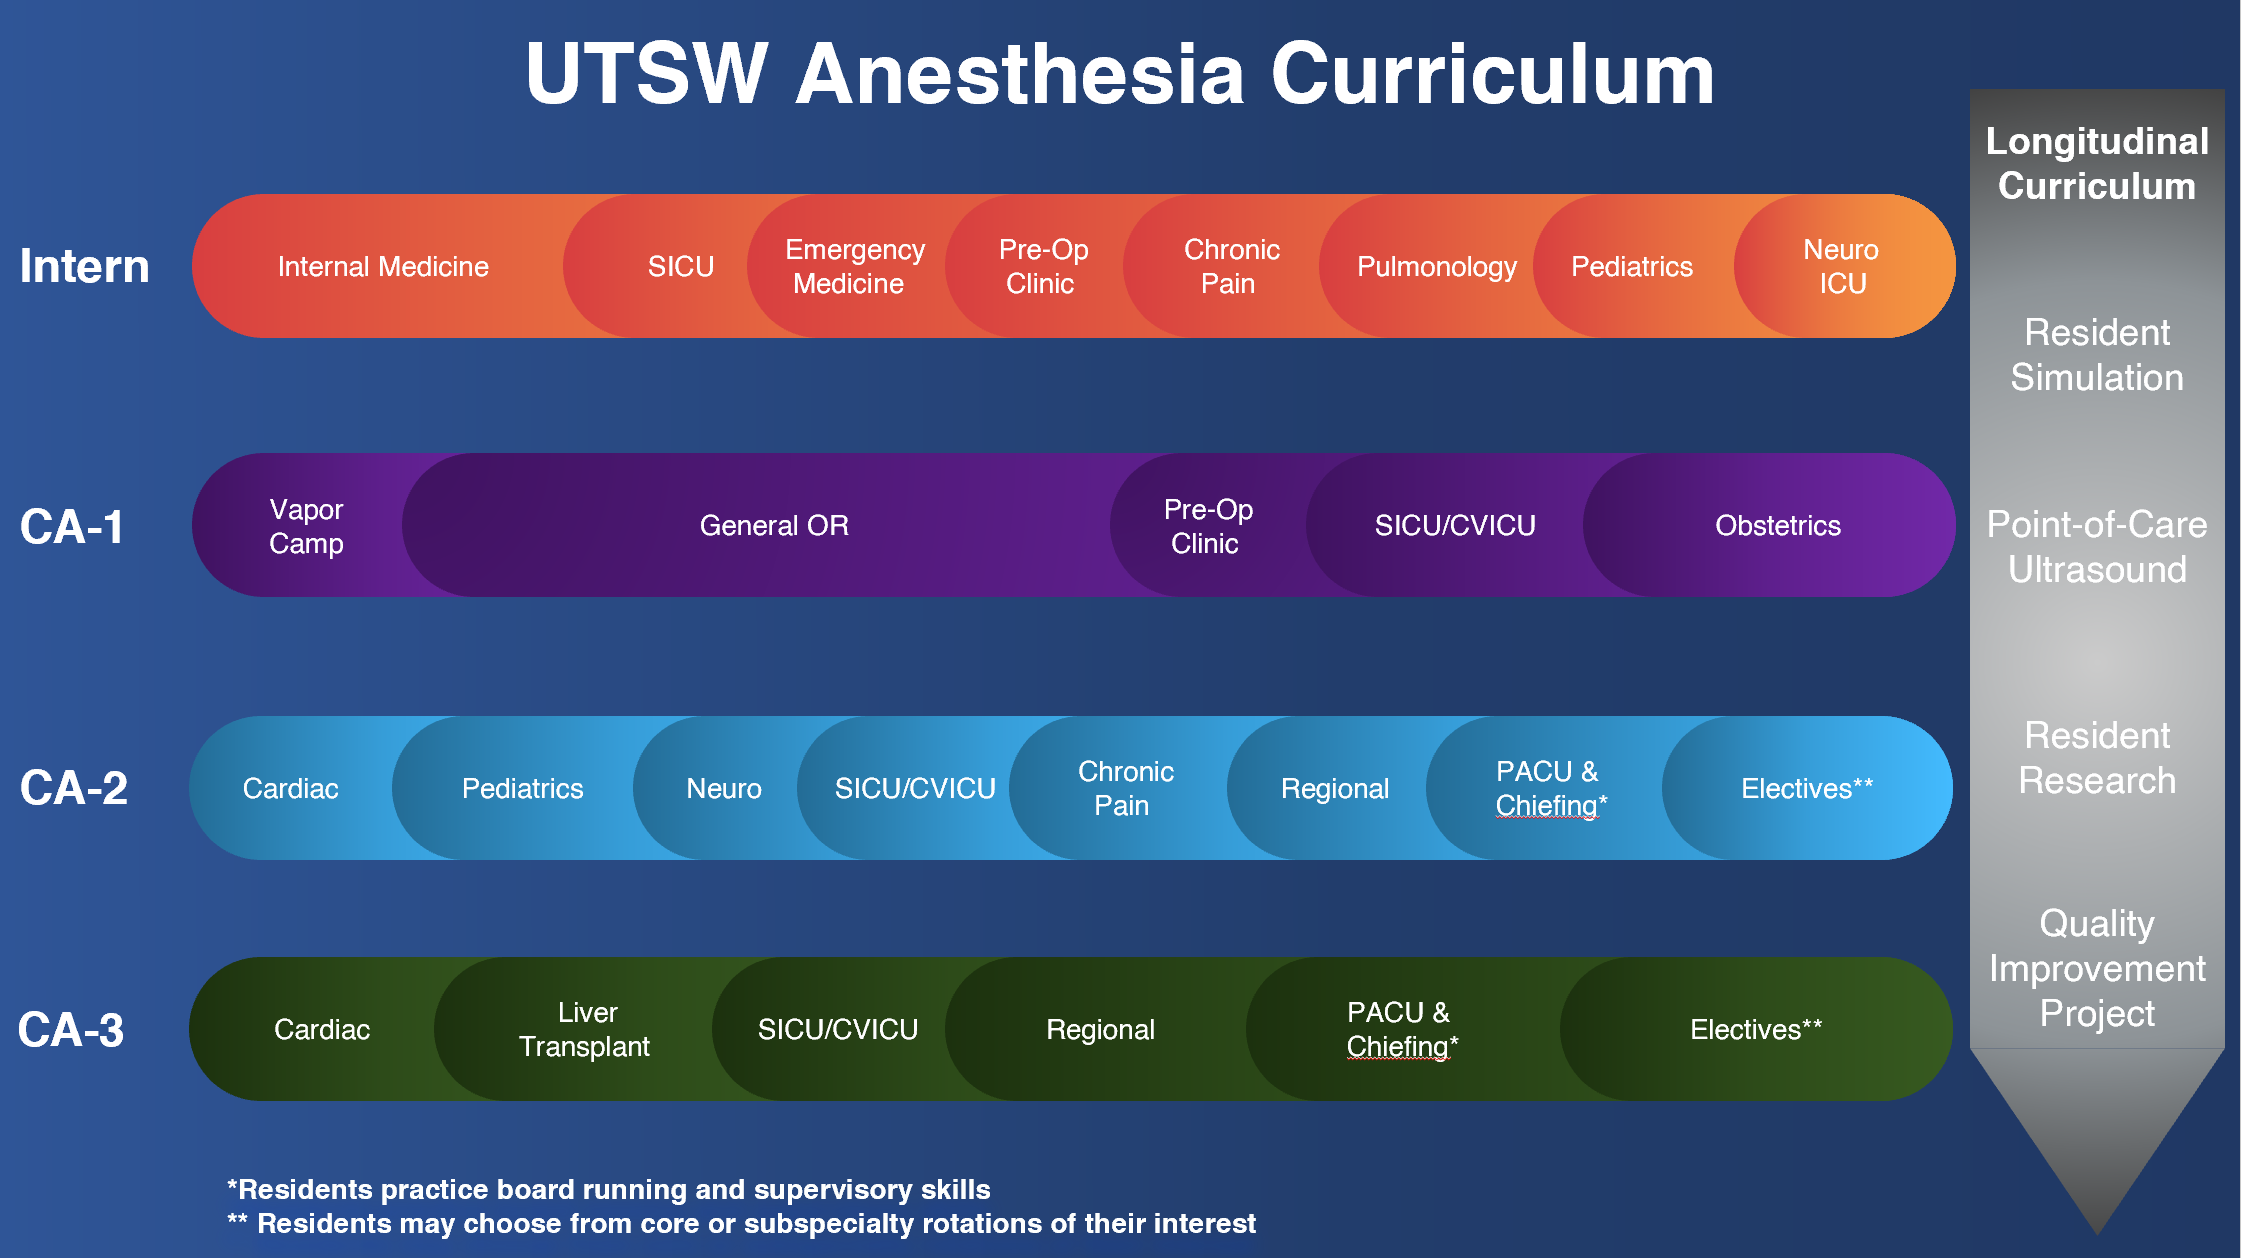 Anesthesiology residency curriculum